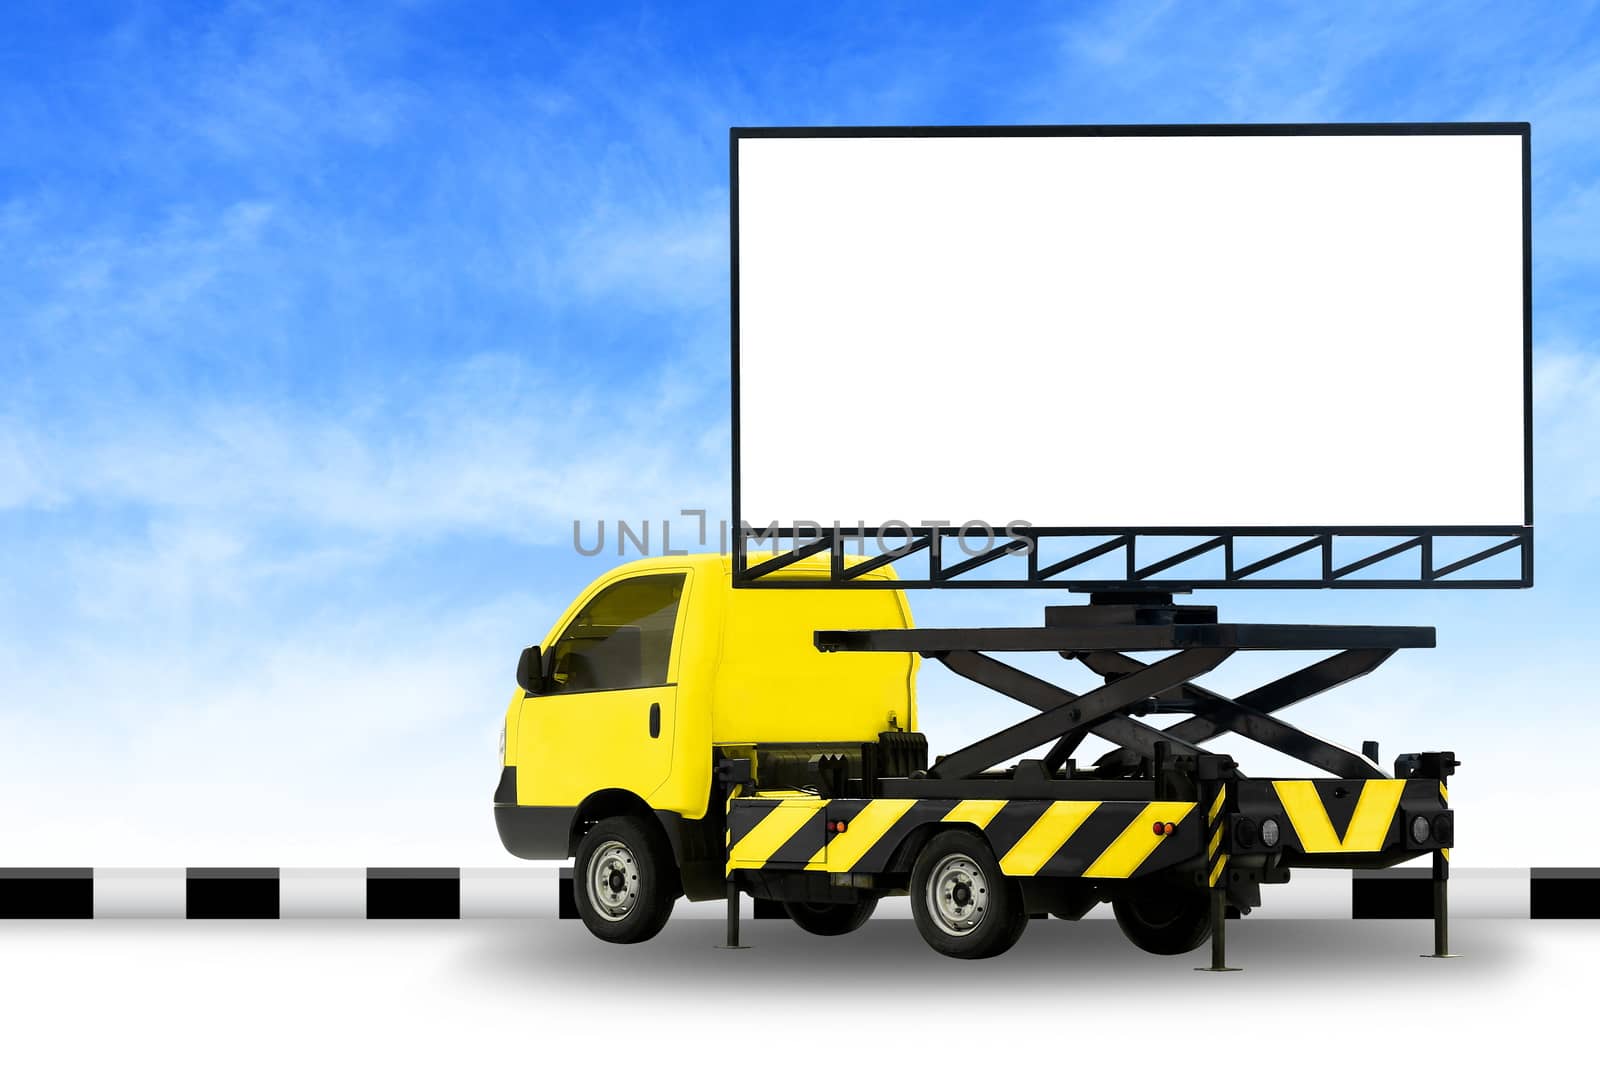 Billboard blank on car yellow truck LED panel for sign Advertising isolated on background sky, Large banner and billboard Roadside for an advertisement large by cgdeaw